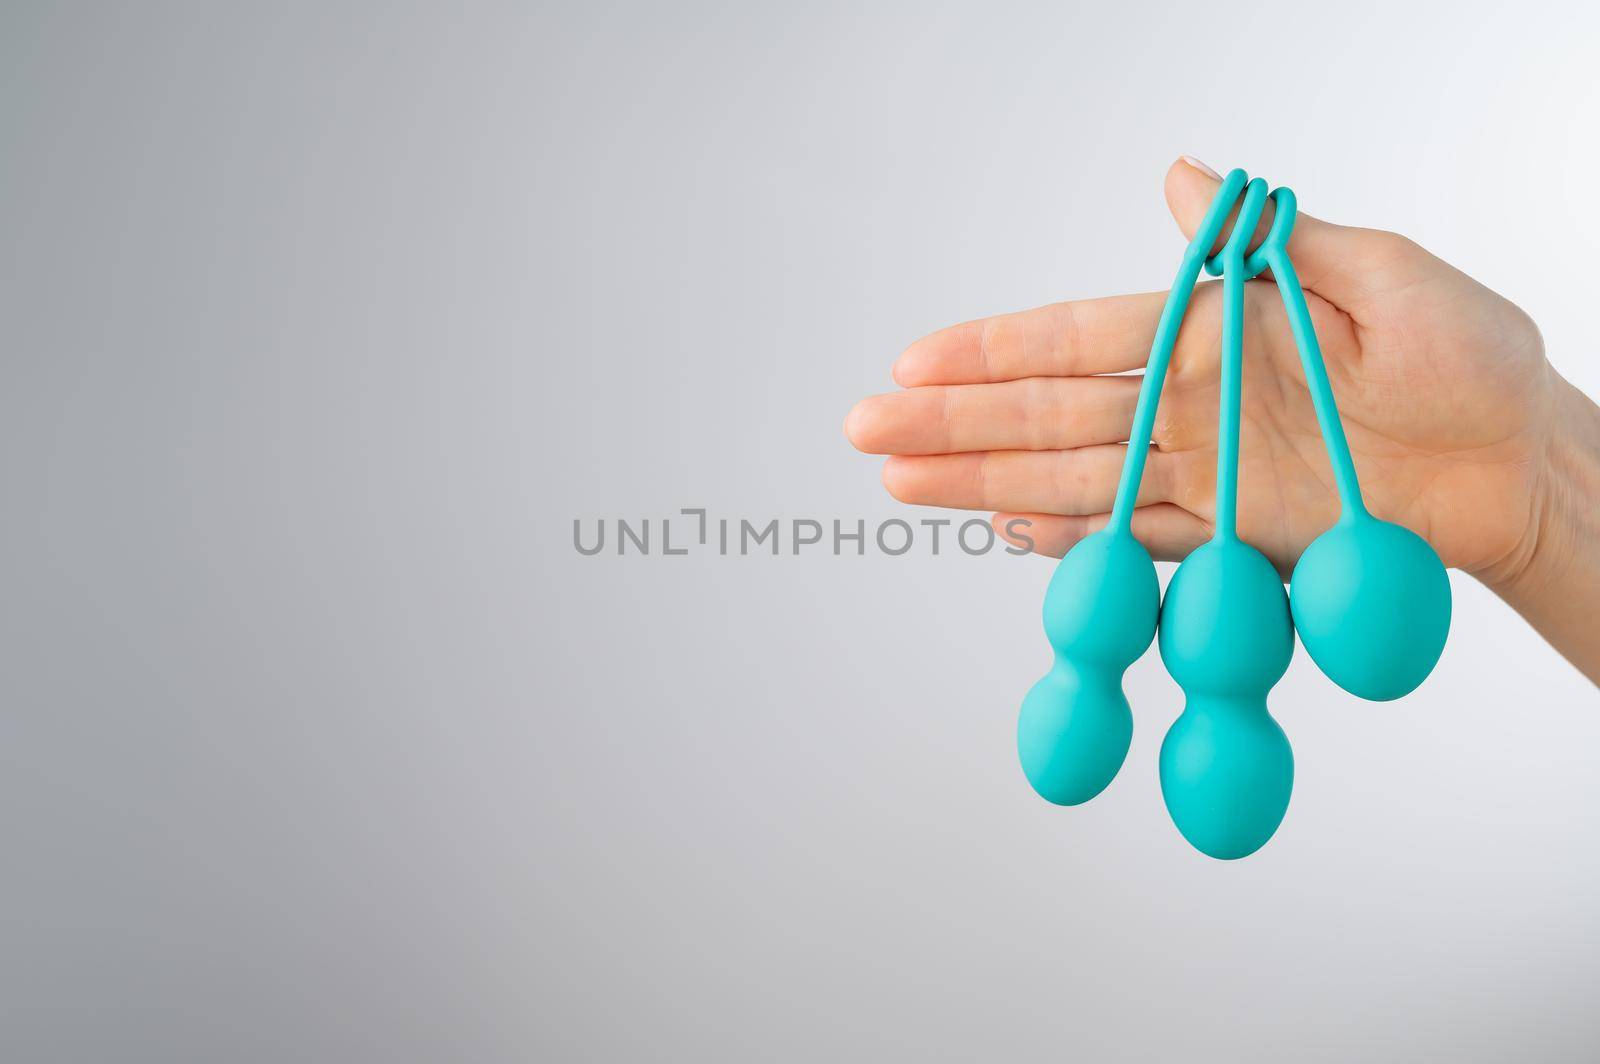 A faceless woman demonstrates a set of mint-colored vaginal balls. Girl holding a kegel trainer for training pelvic floor muscles on a white background